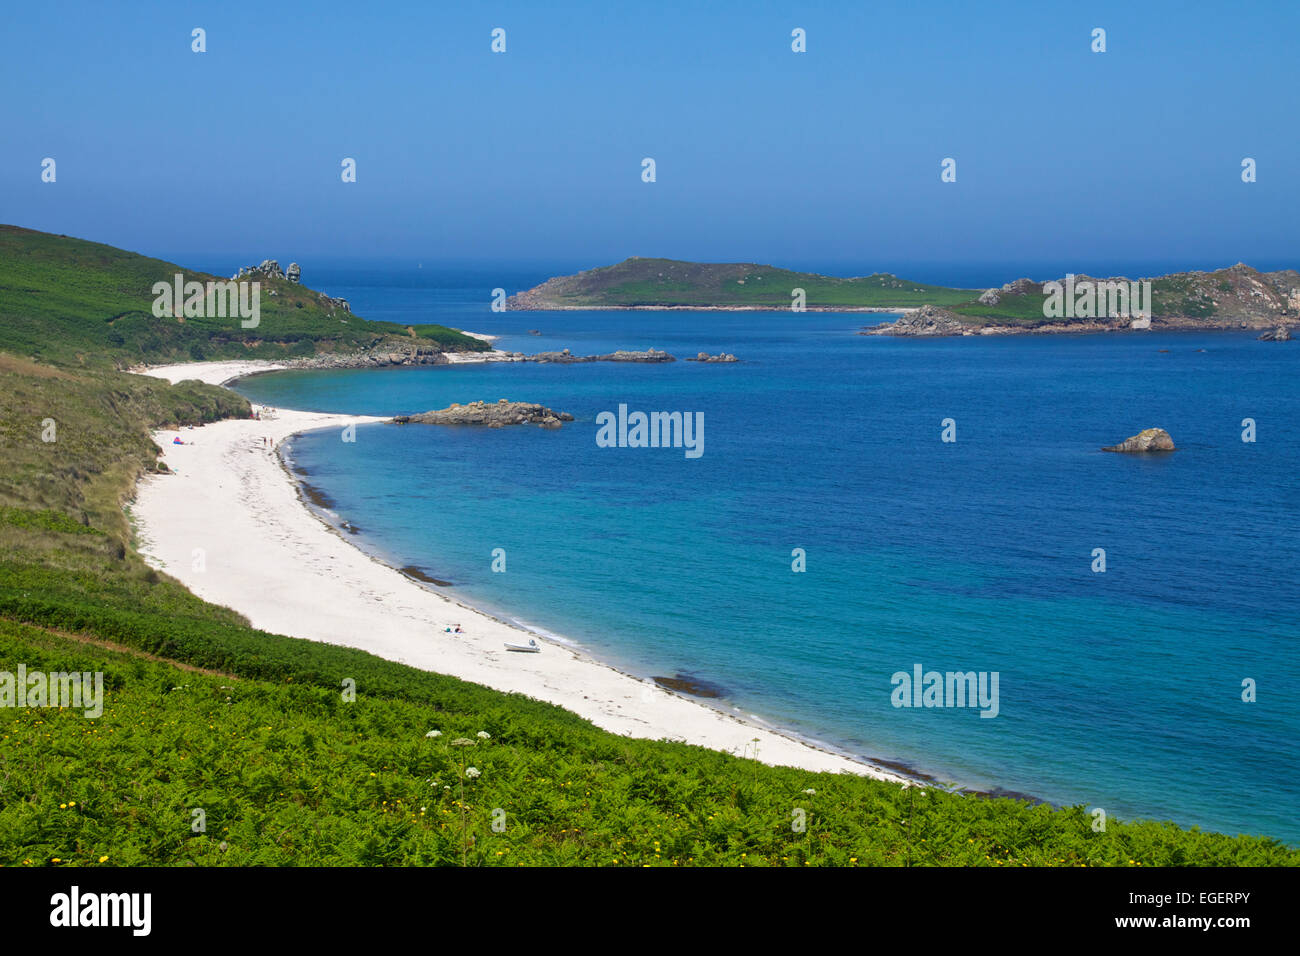 St Martin's Isles of Scilly white beaches and azure sea Stock Photo